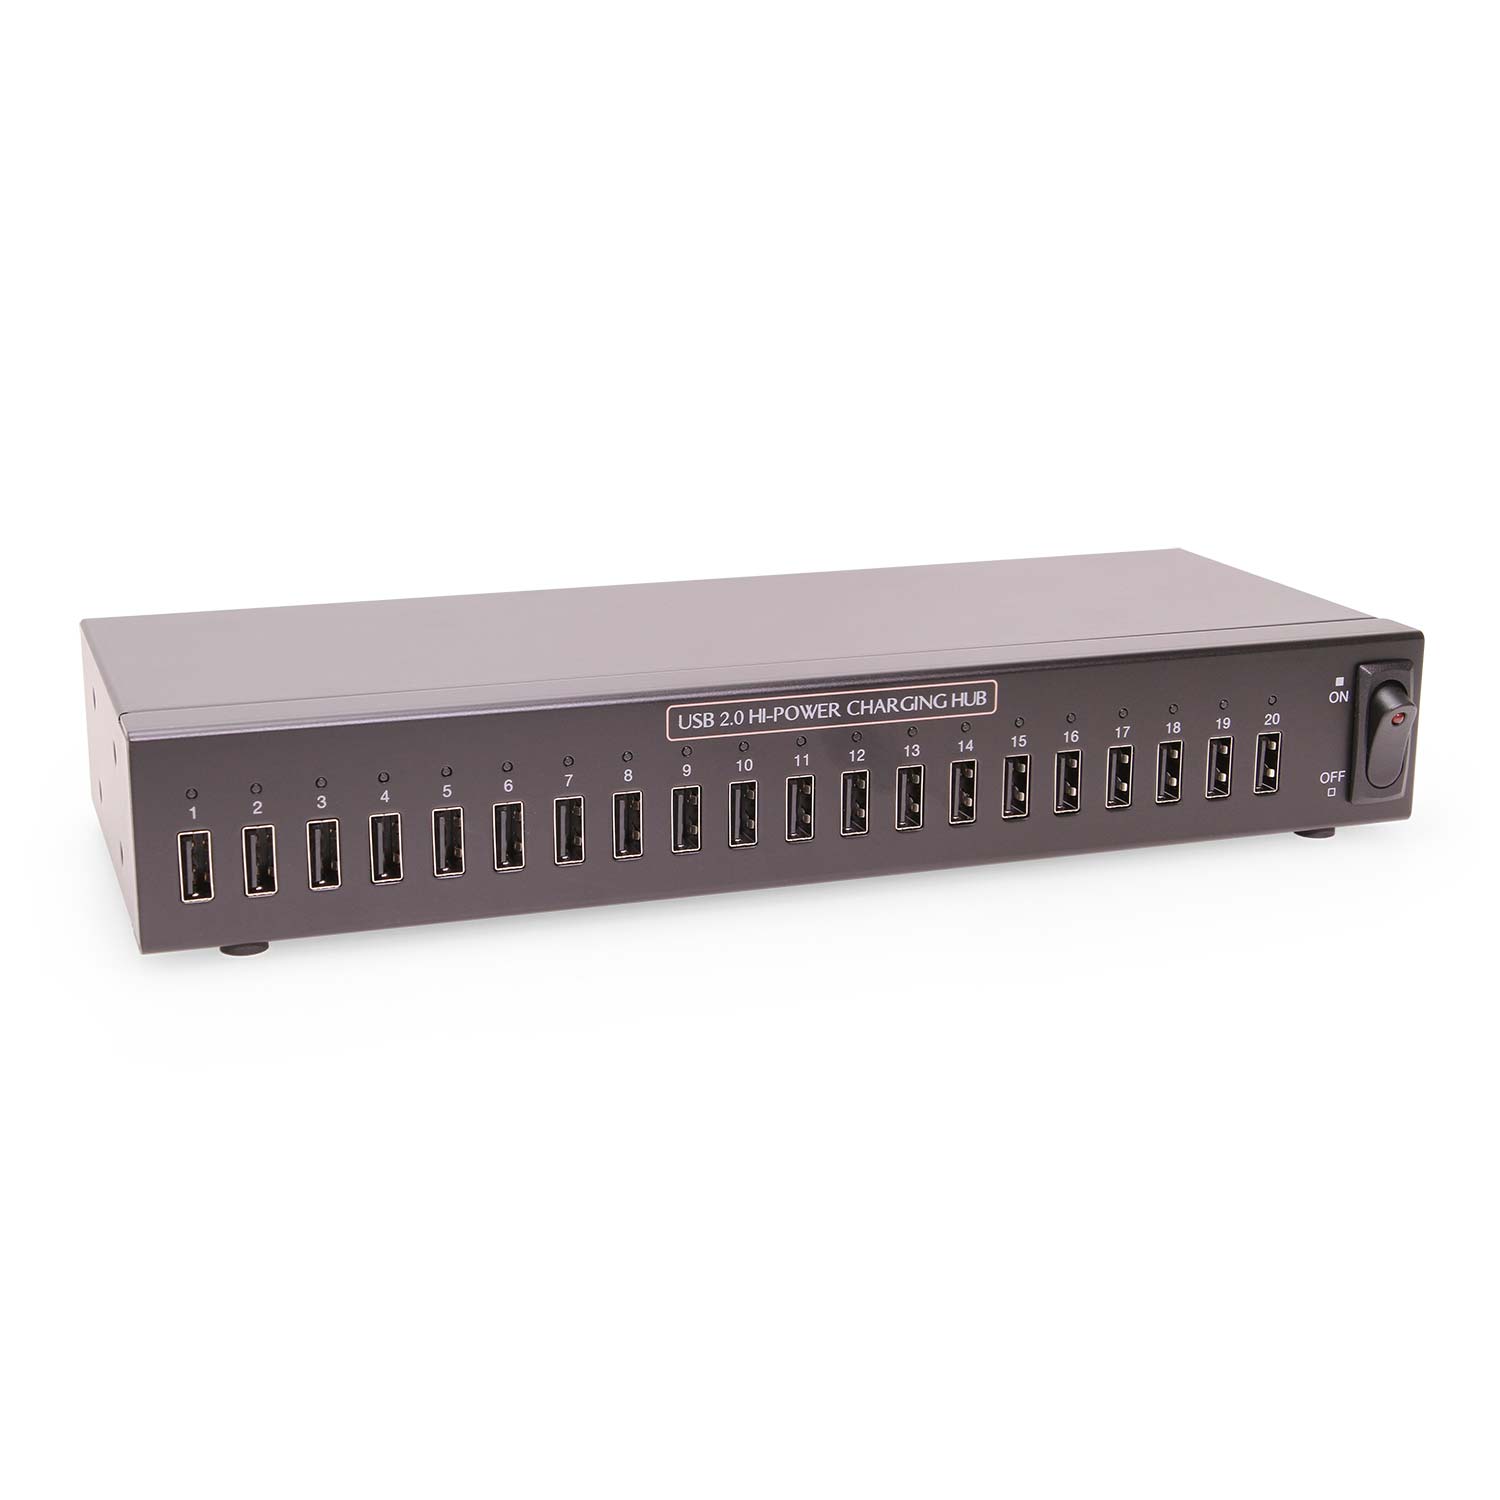 20 Port USB 2.0 Industrial 2.4A Charging Hub w/ ESD Surge Protection & Port Status LEDs -